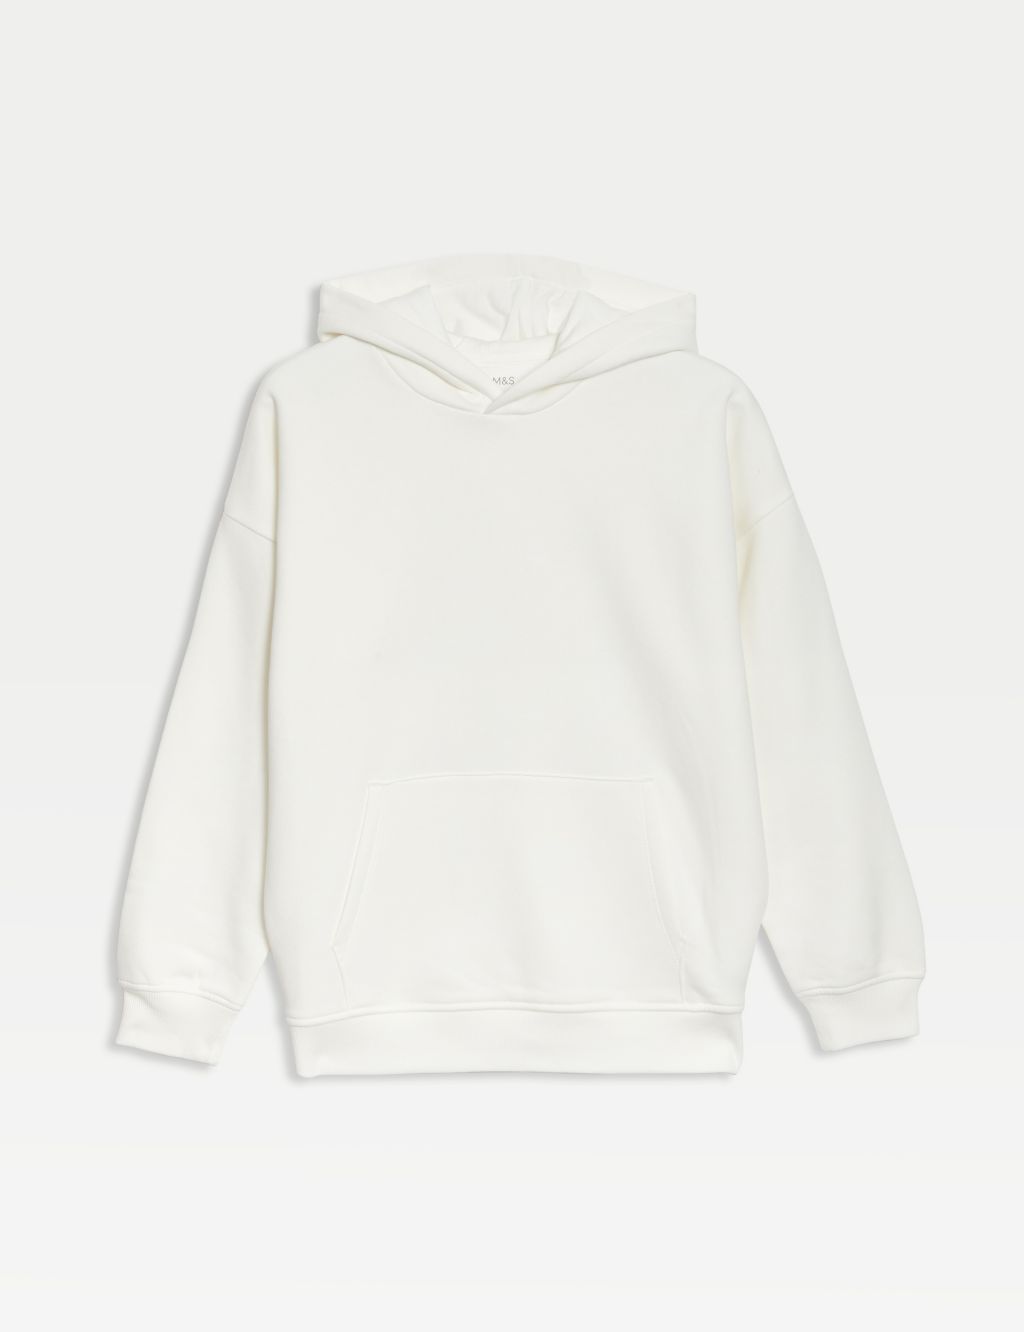 Cotton Rich Oversized Hoodie (6-16 Yrs) image 1